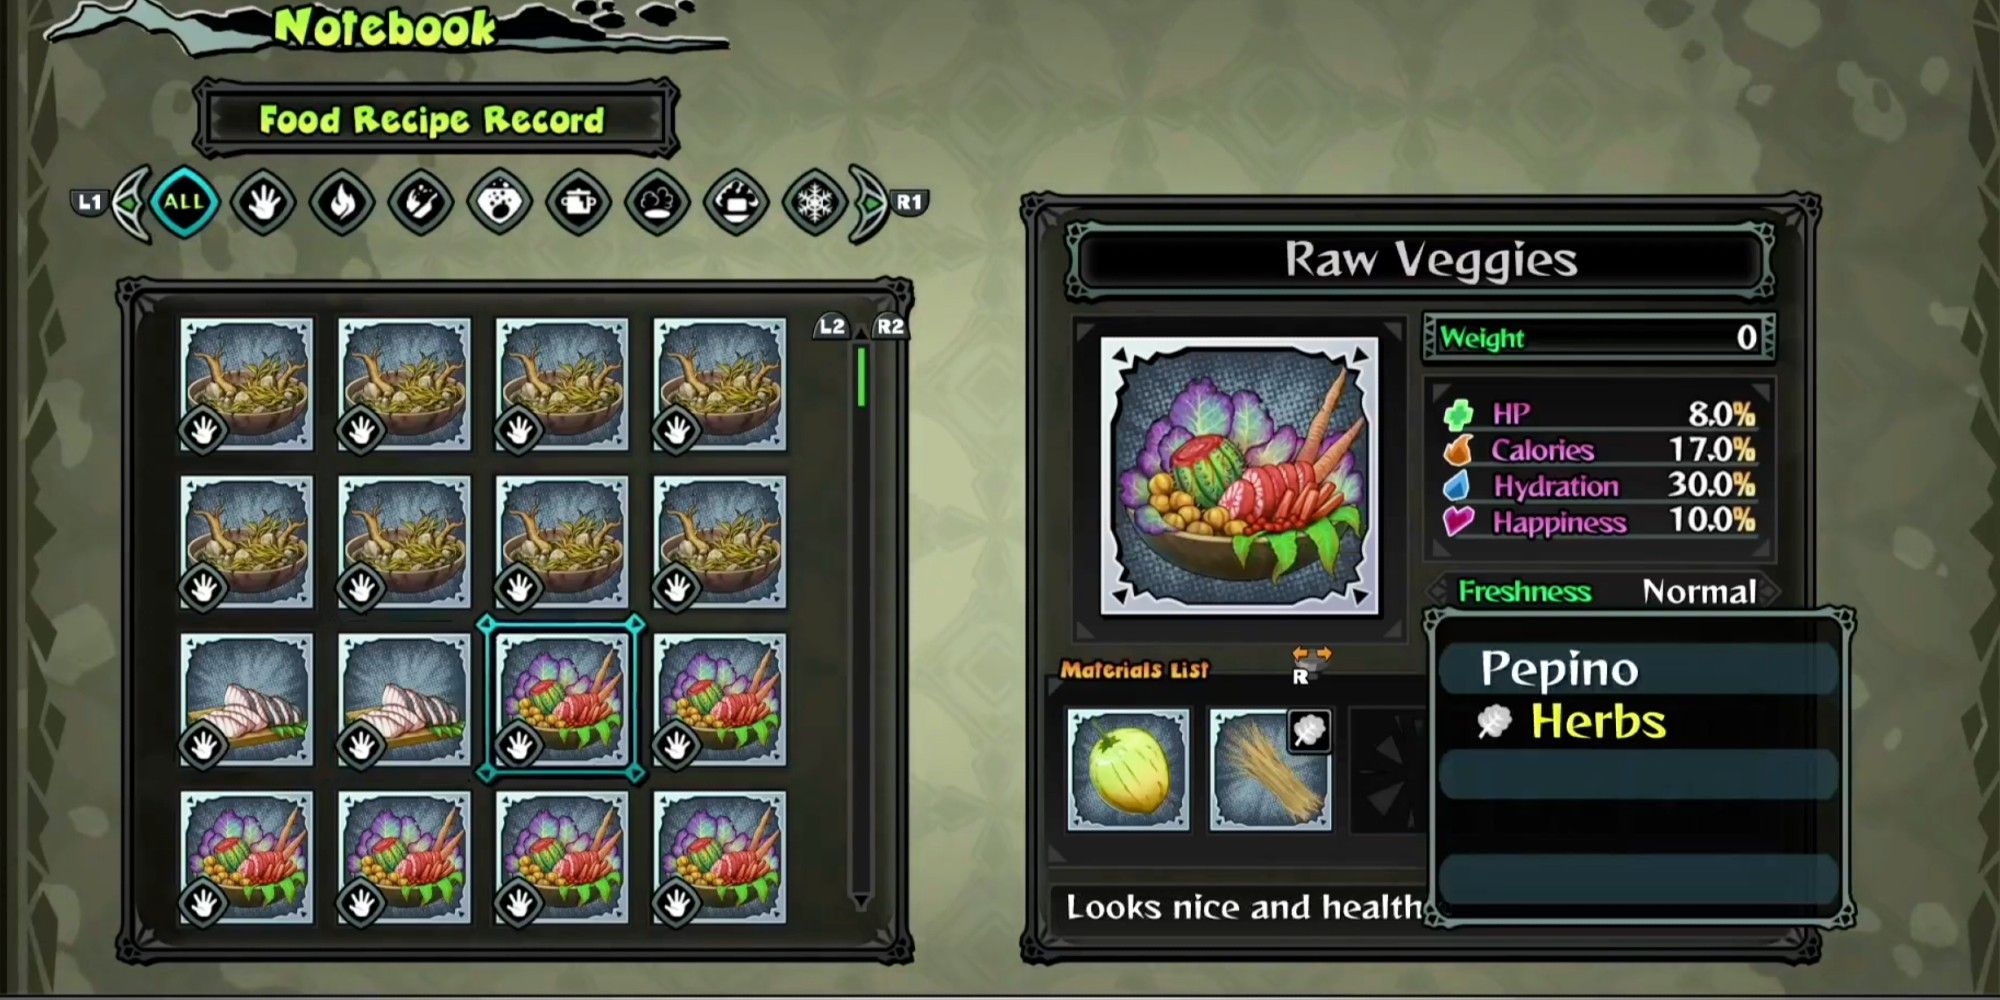 Raw vegetables are displayed on the right side of the screen.